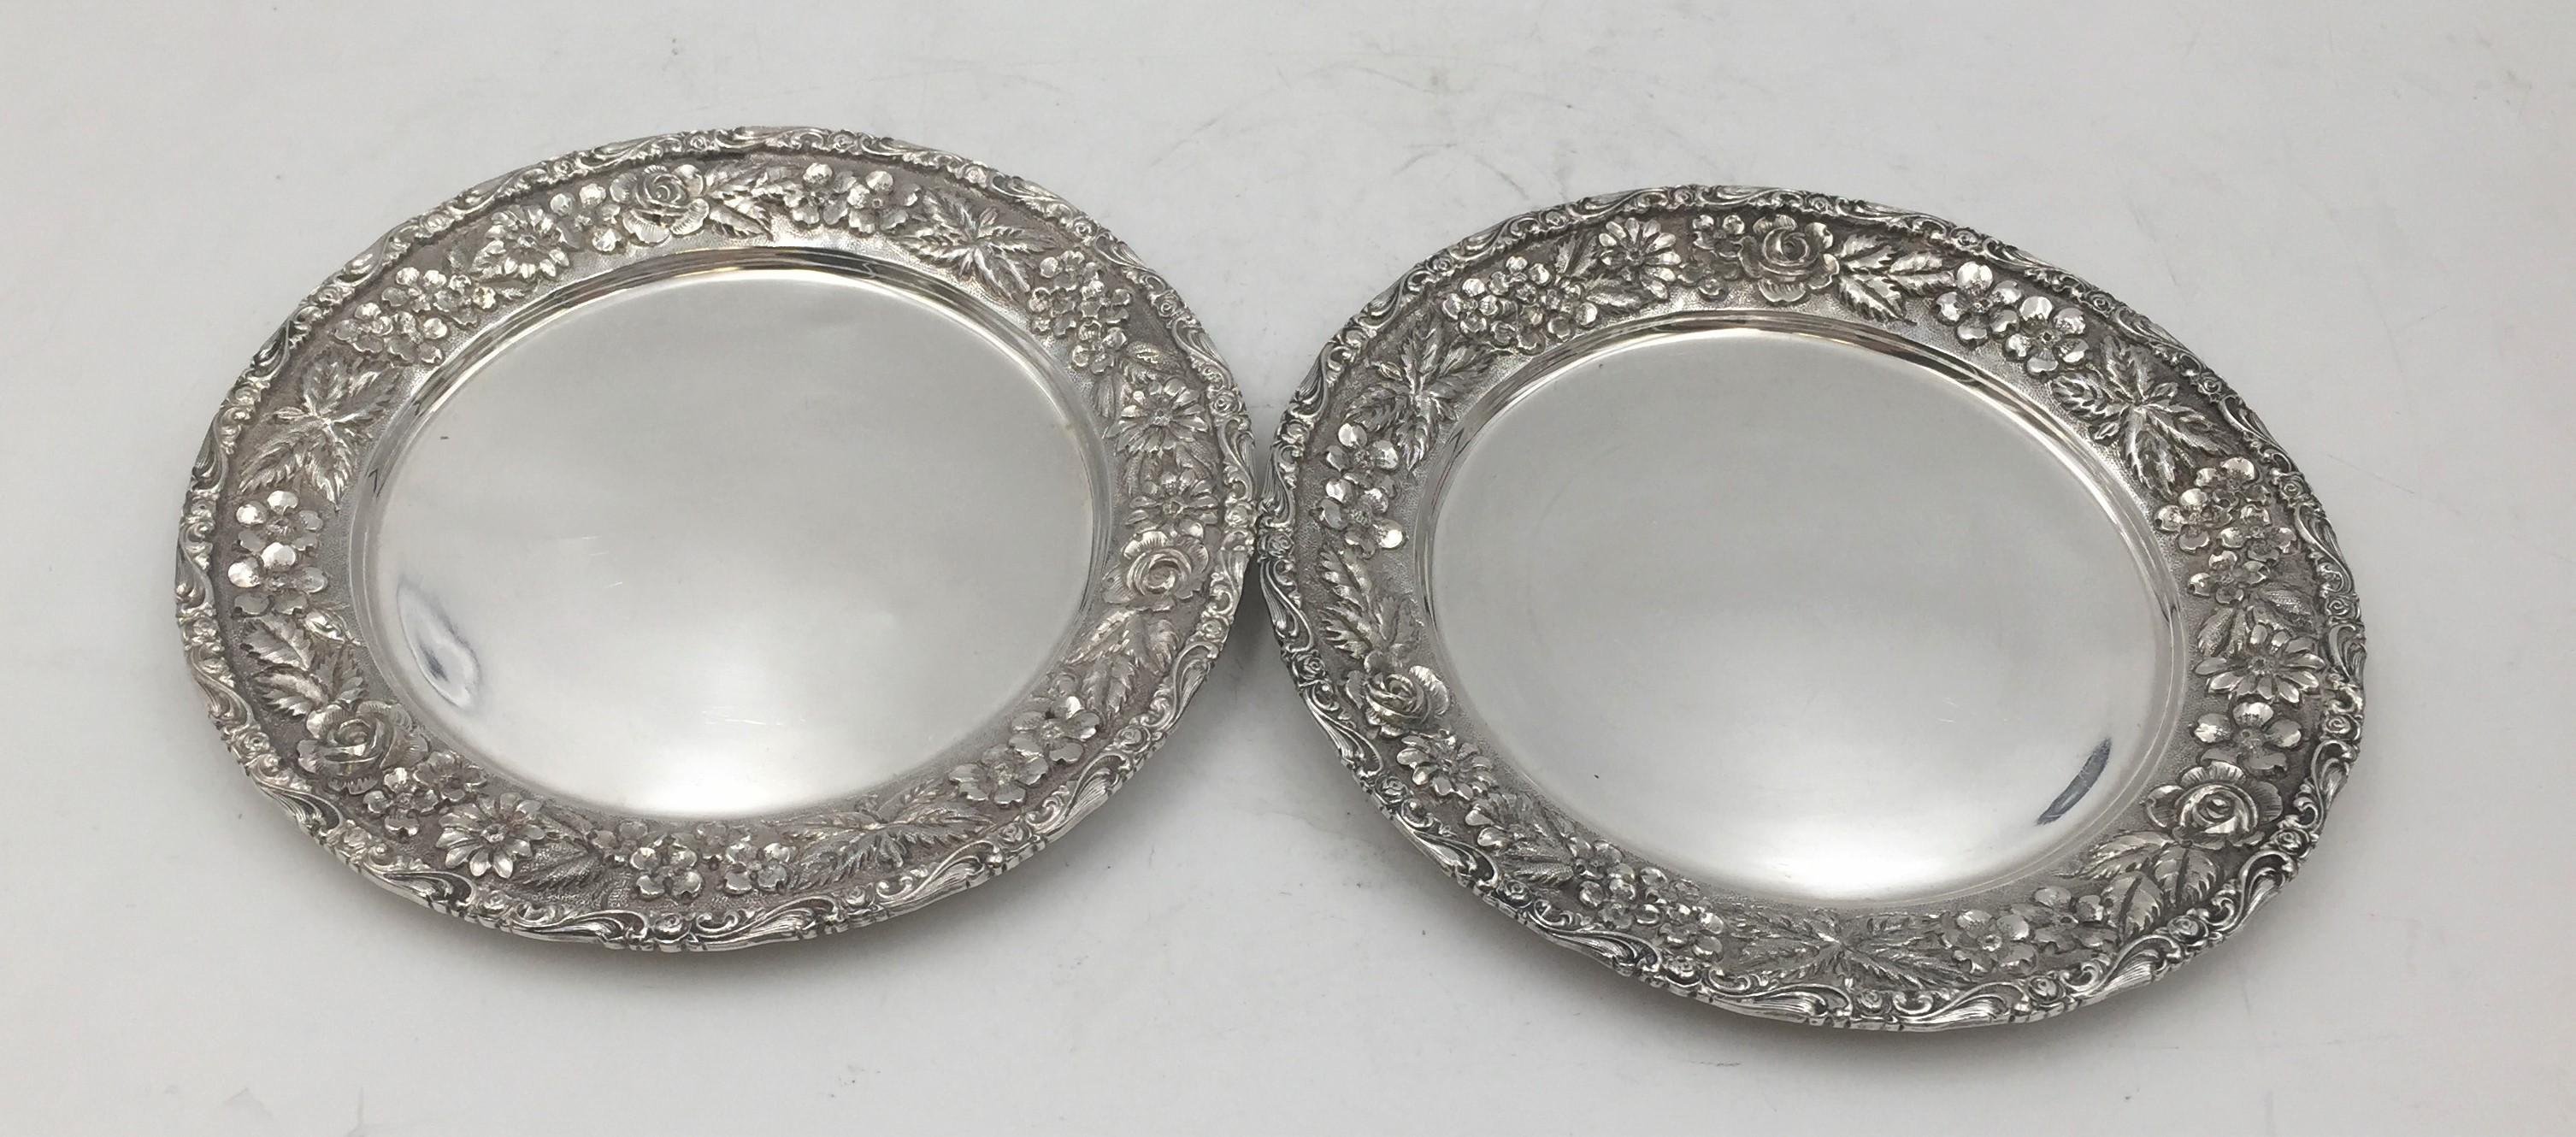 Pair of Schofield sterling silver Repousse wine coasters in beautiful repousse design and in famed Baltimore Rose pattern measuring 6'' in diameter. Total weight is 8.6 ozt.

The Schofield Company (1903–1977) also known as the Baltimore